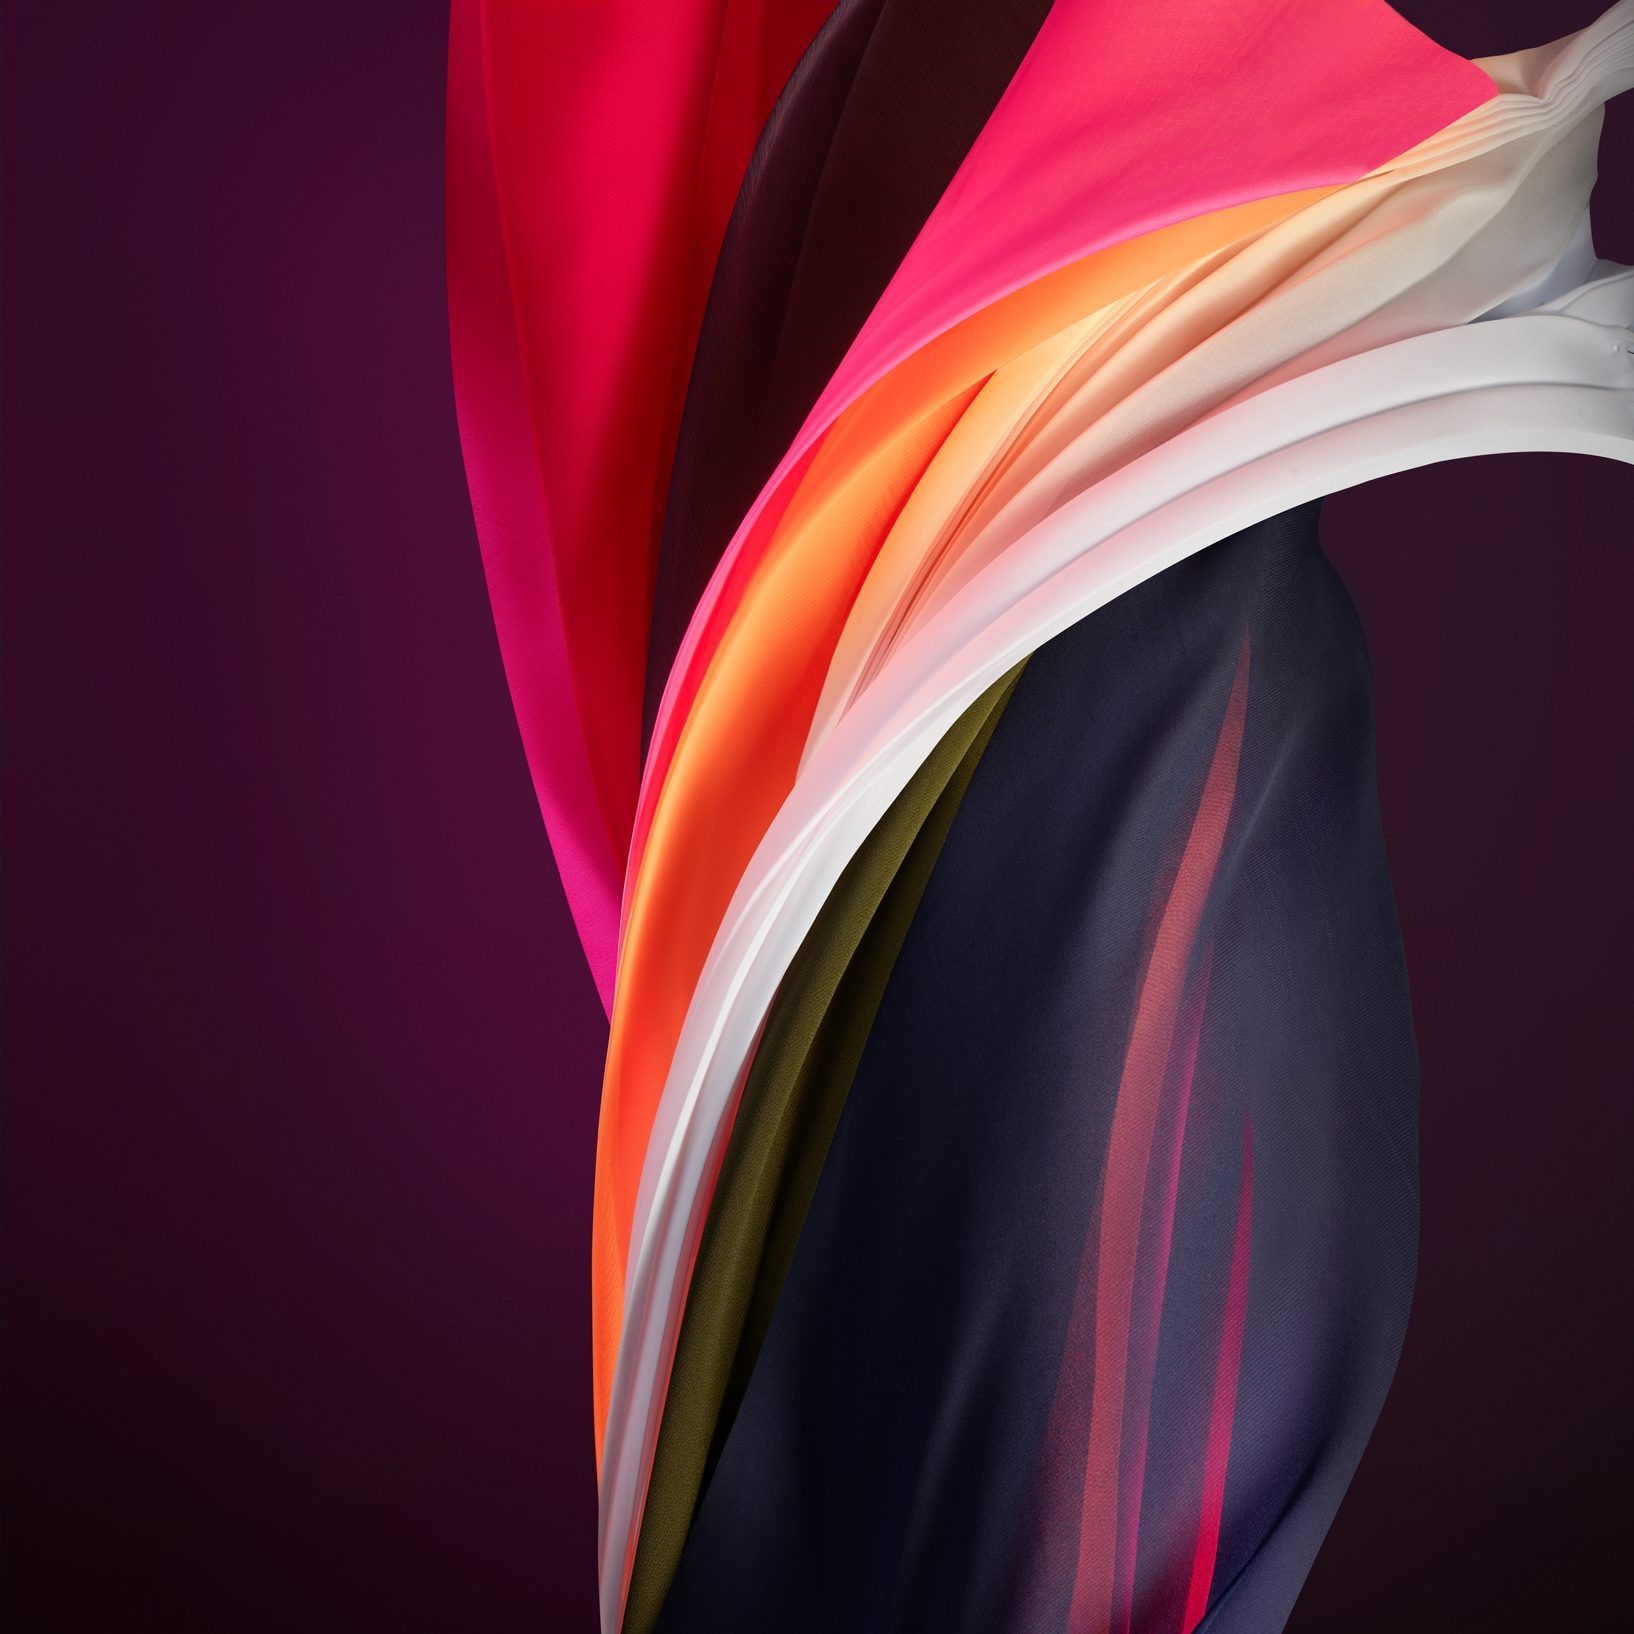 Download Apple's new 2020 iPhone SE wallpaper here